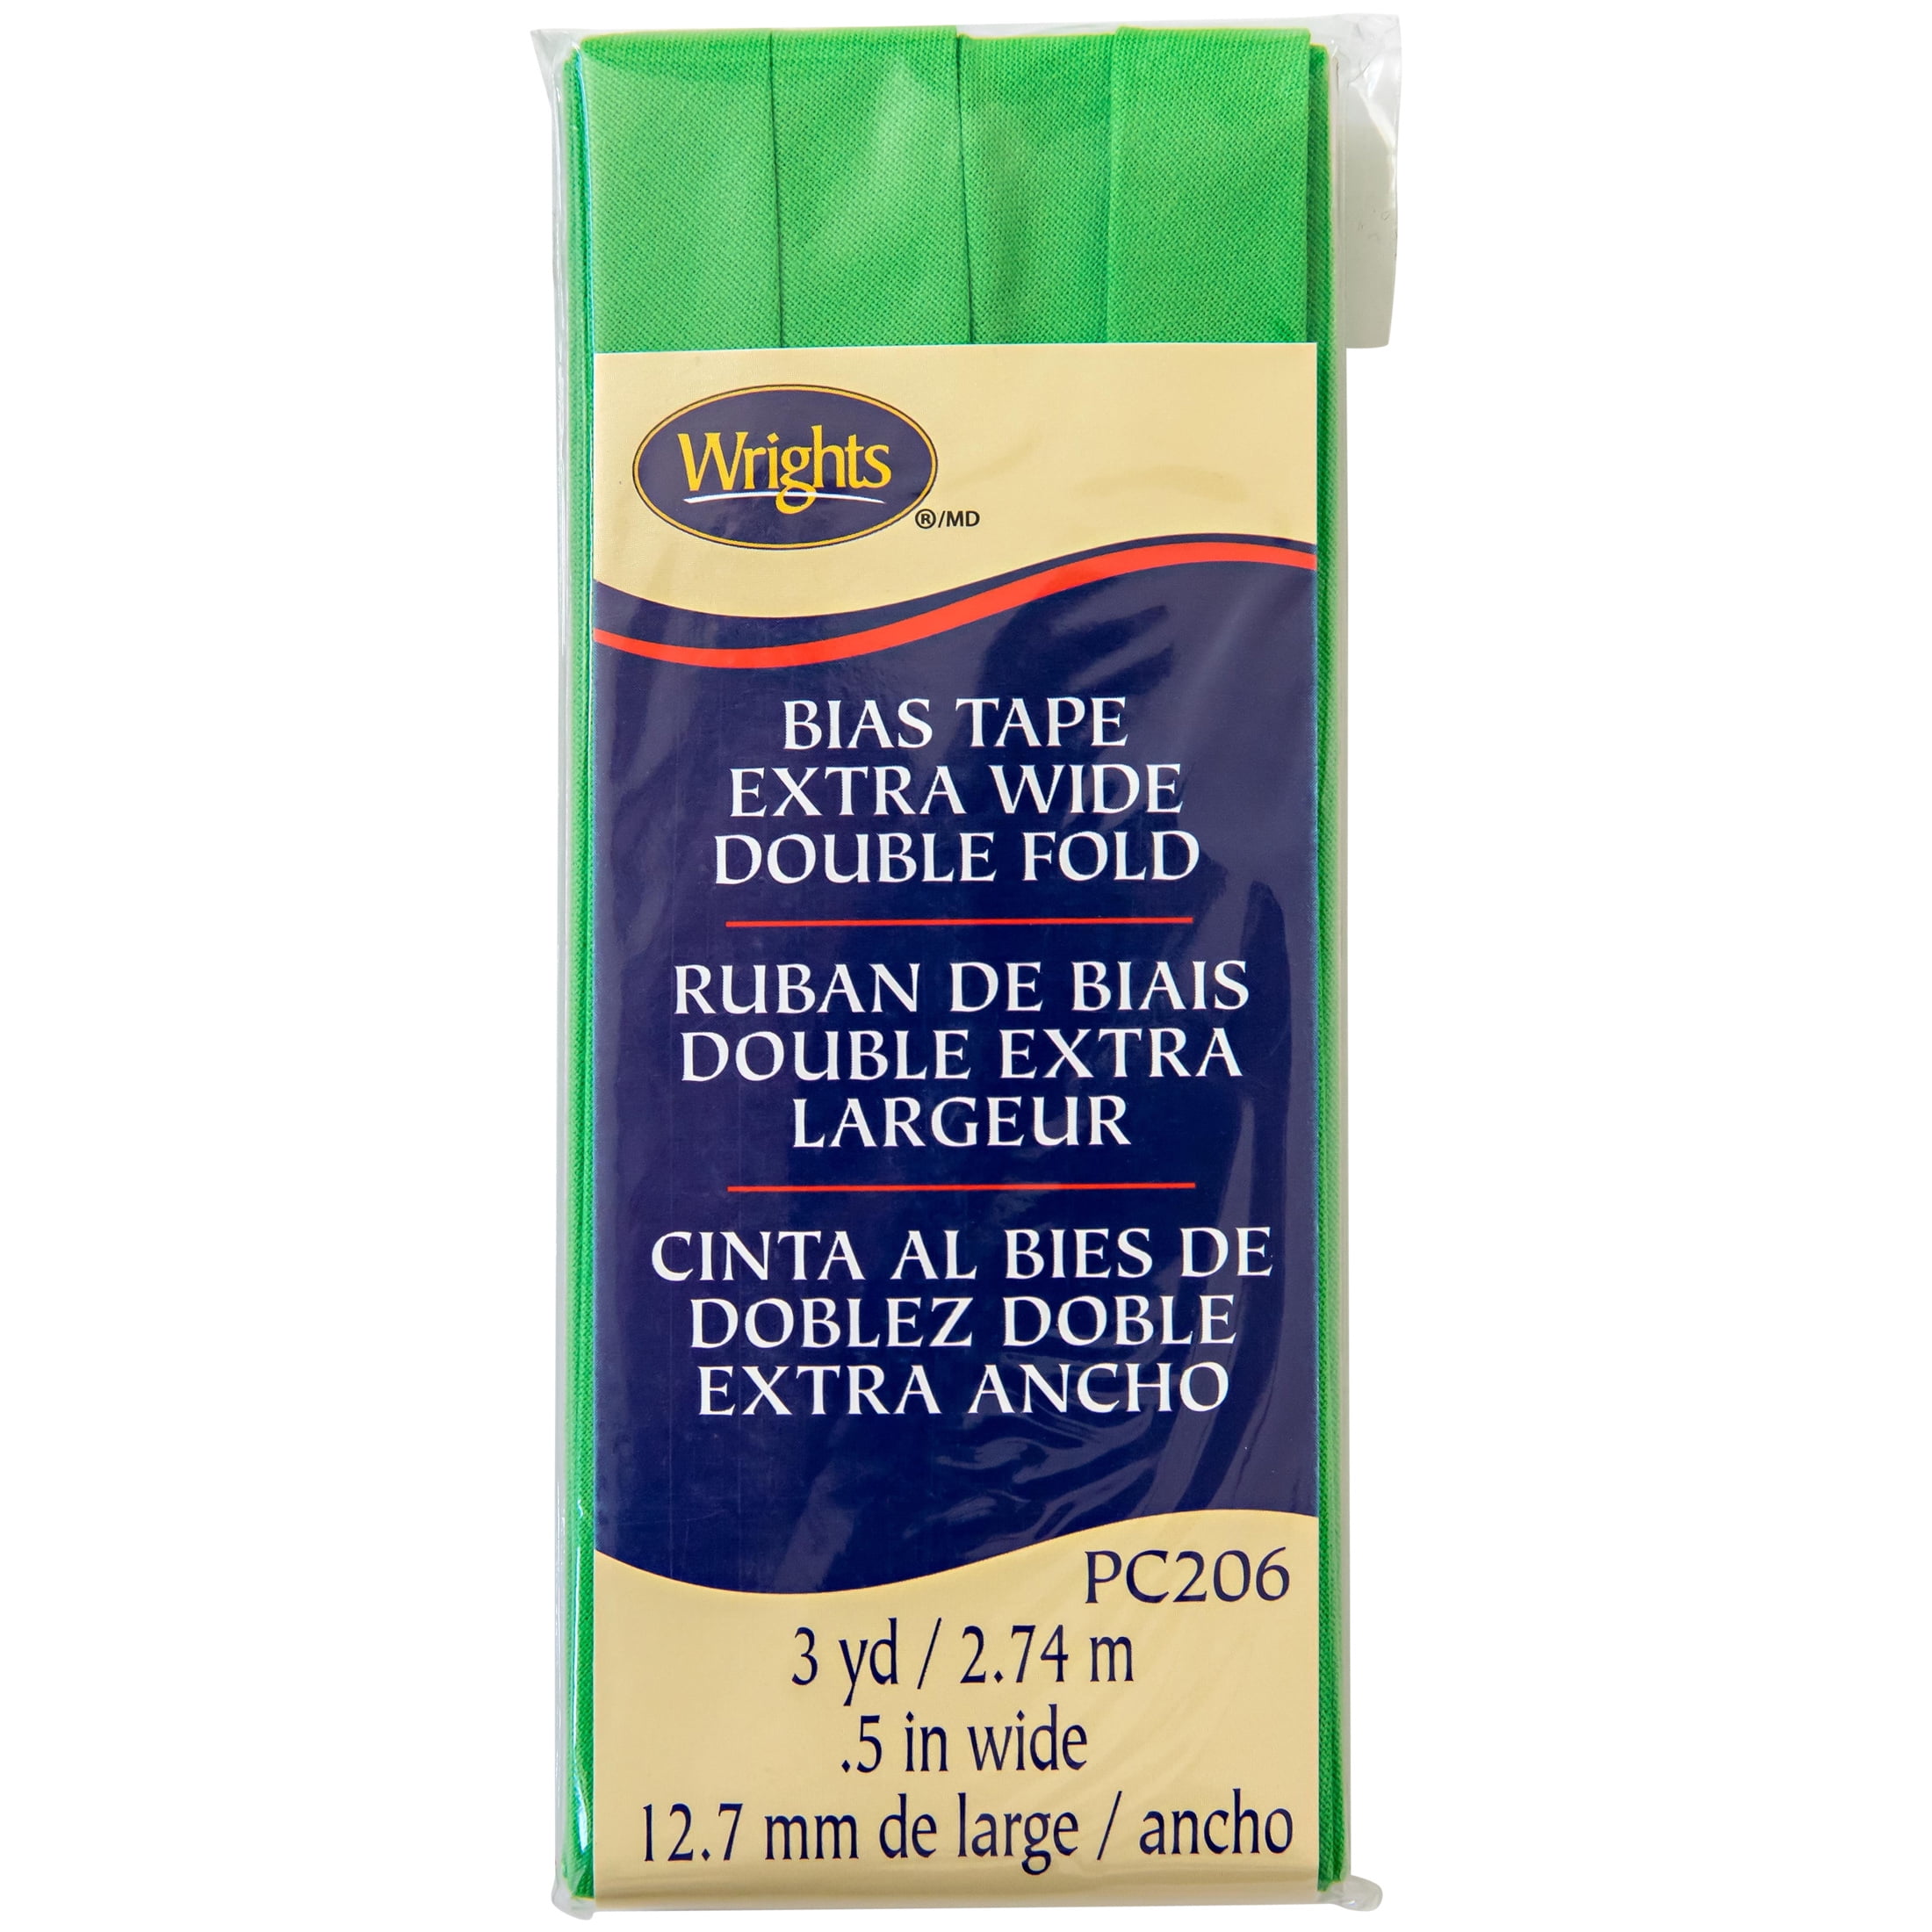 Wrights 1/2" Green Extra Wide Double Fold Bias Tape, 3 yd